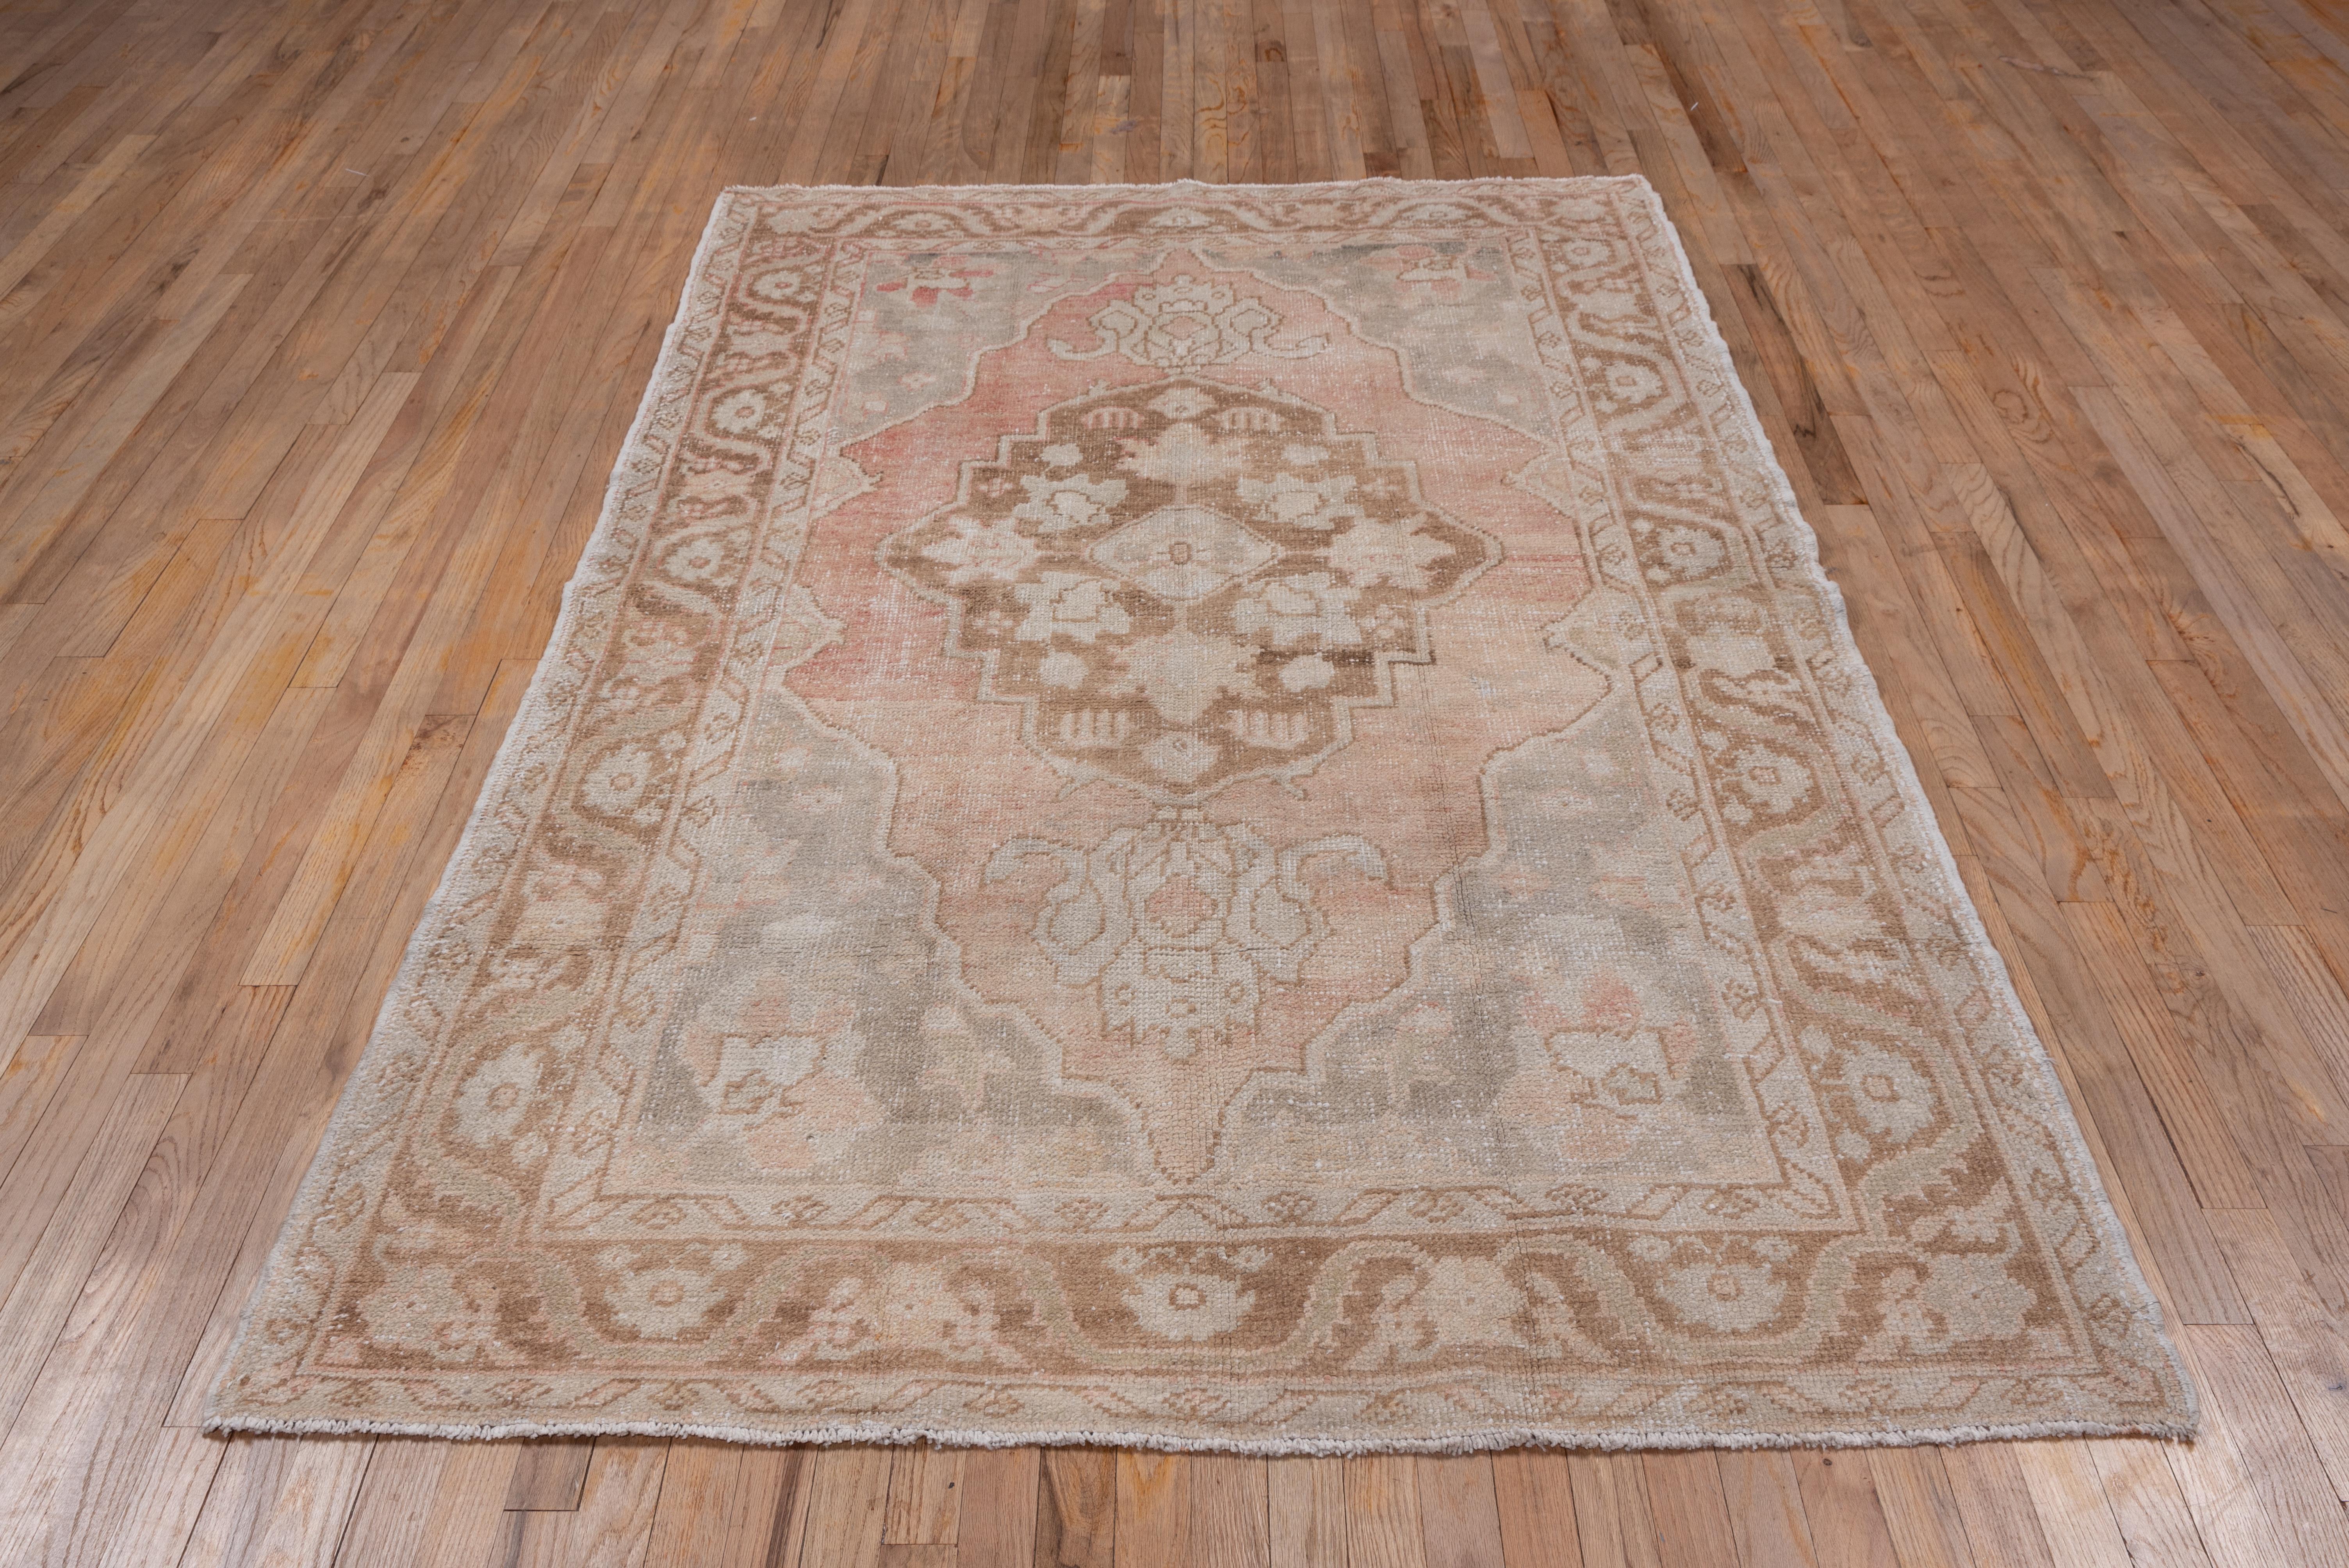 In the Persian Heriz style, the pendanted brown medallion is set on the pale buff sub- field within pearl grey corners. The light brown border displays palmettes joined by a recurving leaf pattern. Slight medallion offset toward one end.